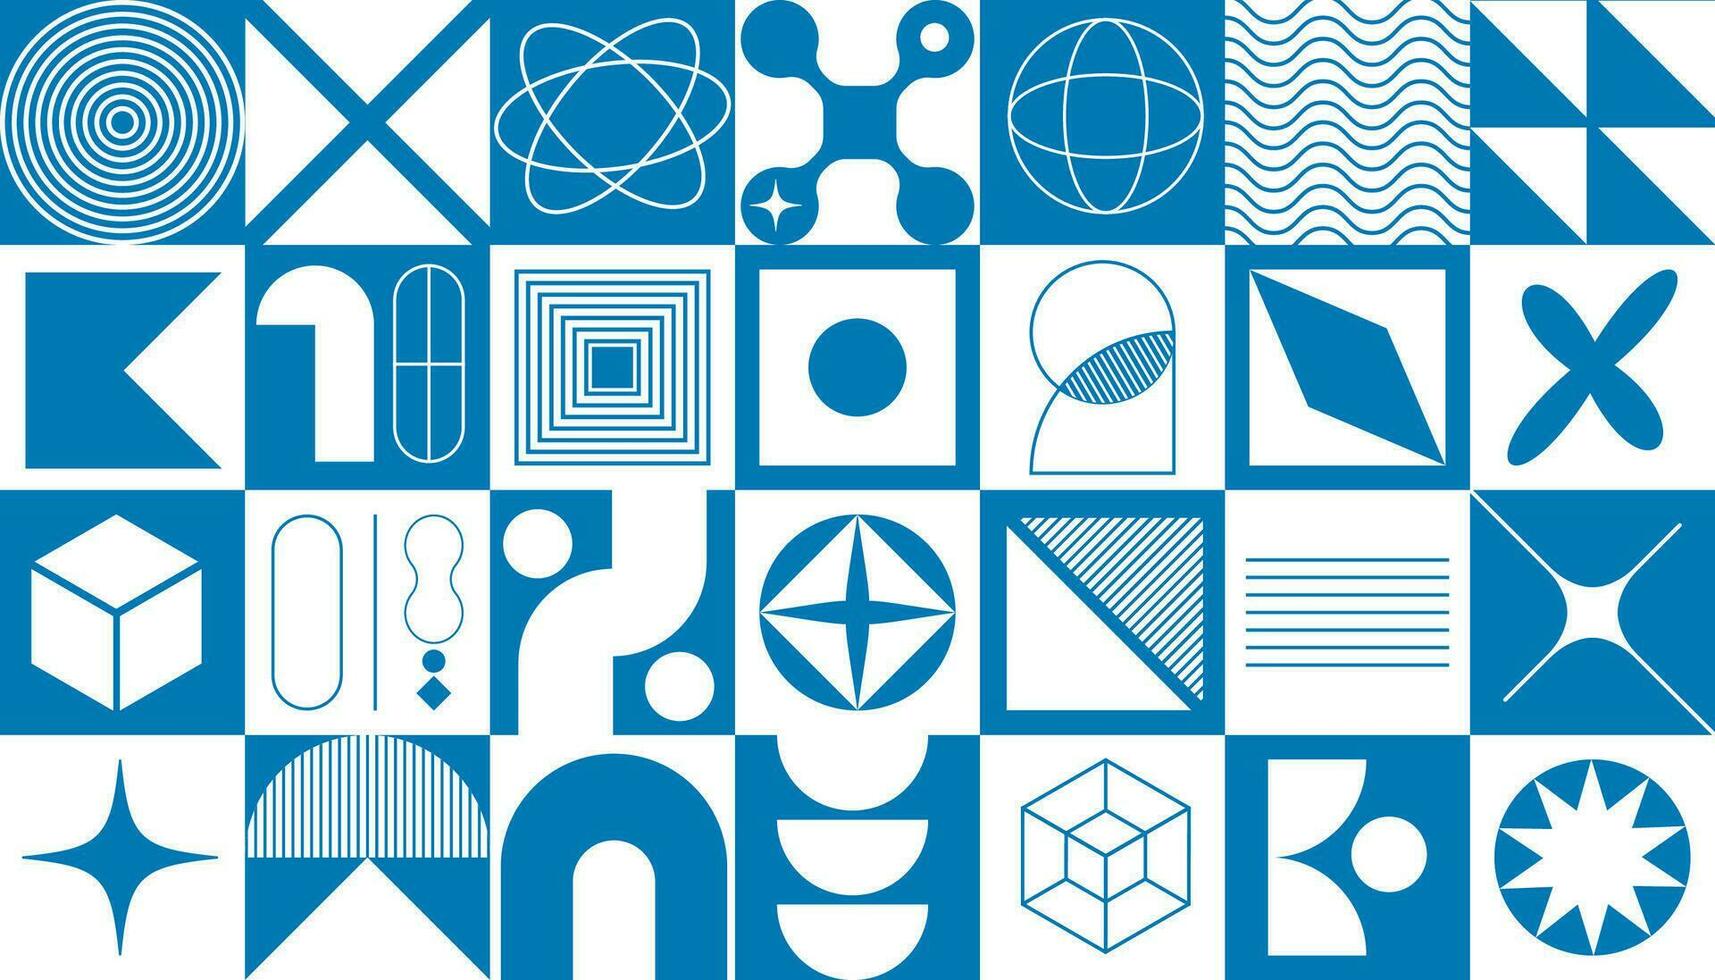 geometric shapes blue color pattern print in Brutalist style. Minimalist Swiss Bauhaus y2k trendy abstract primitive figures and lines design banner vector